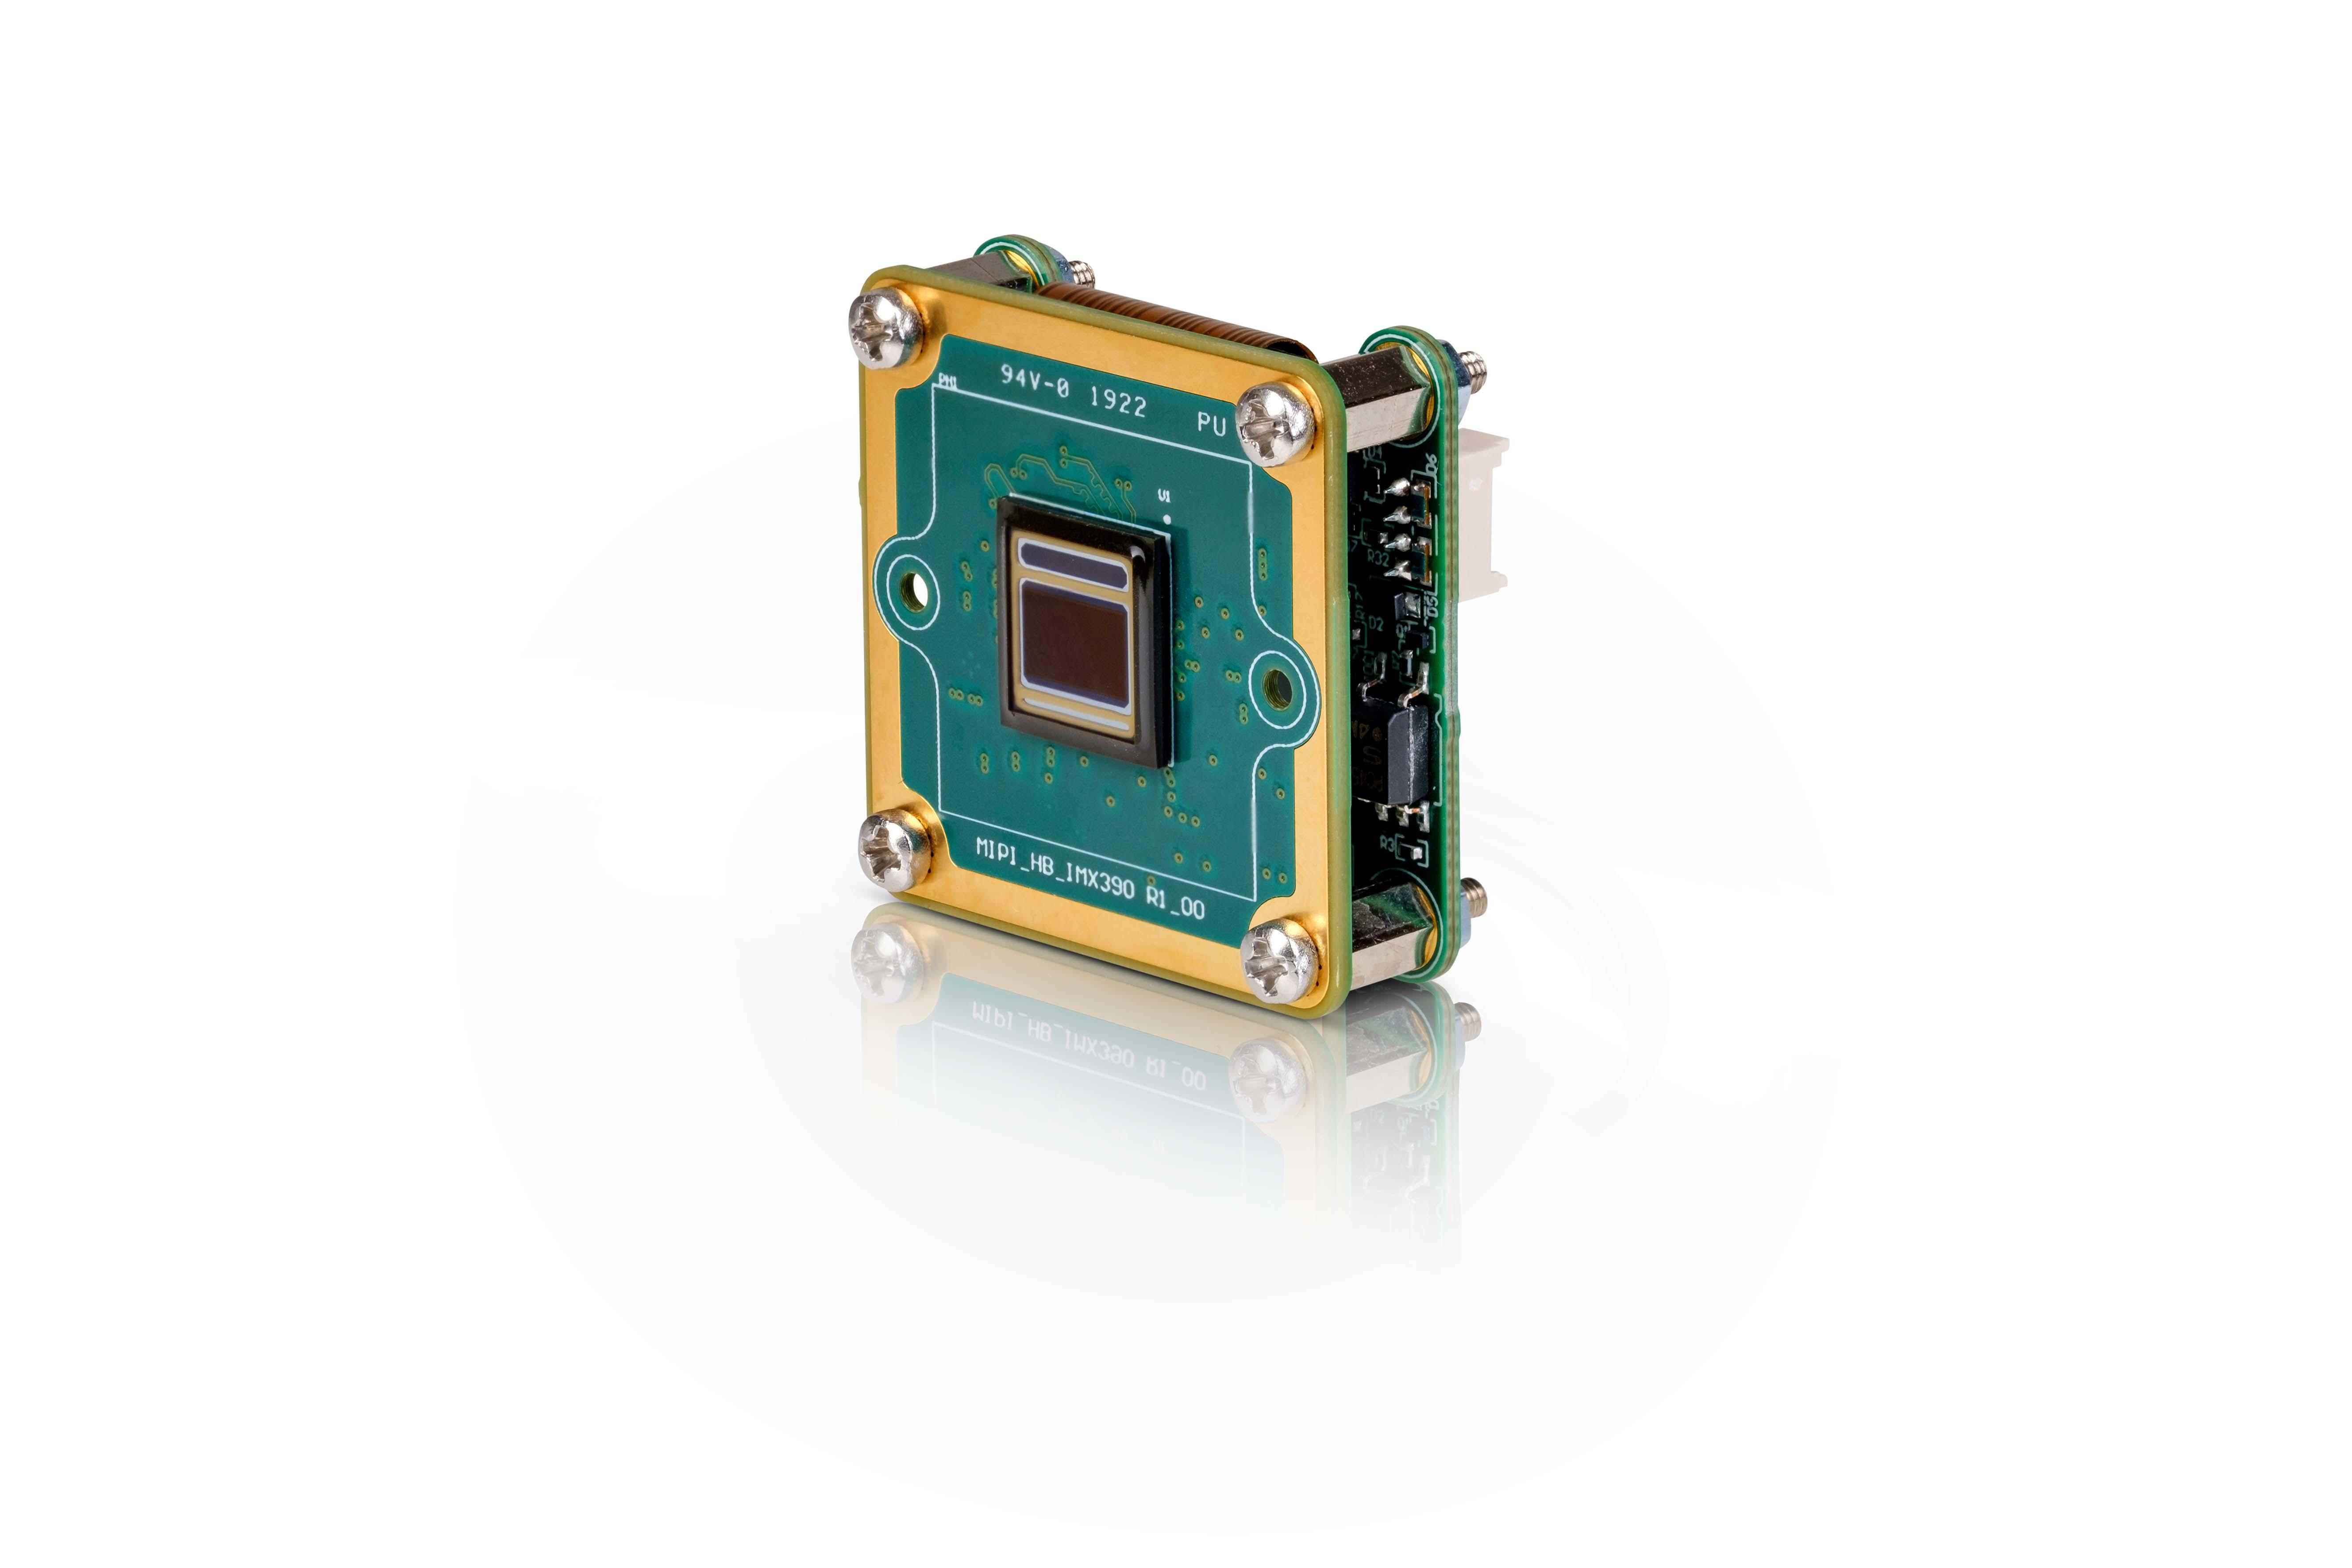 The Imaging Source 0.4MP 1/2.9" Embedded Board Camera